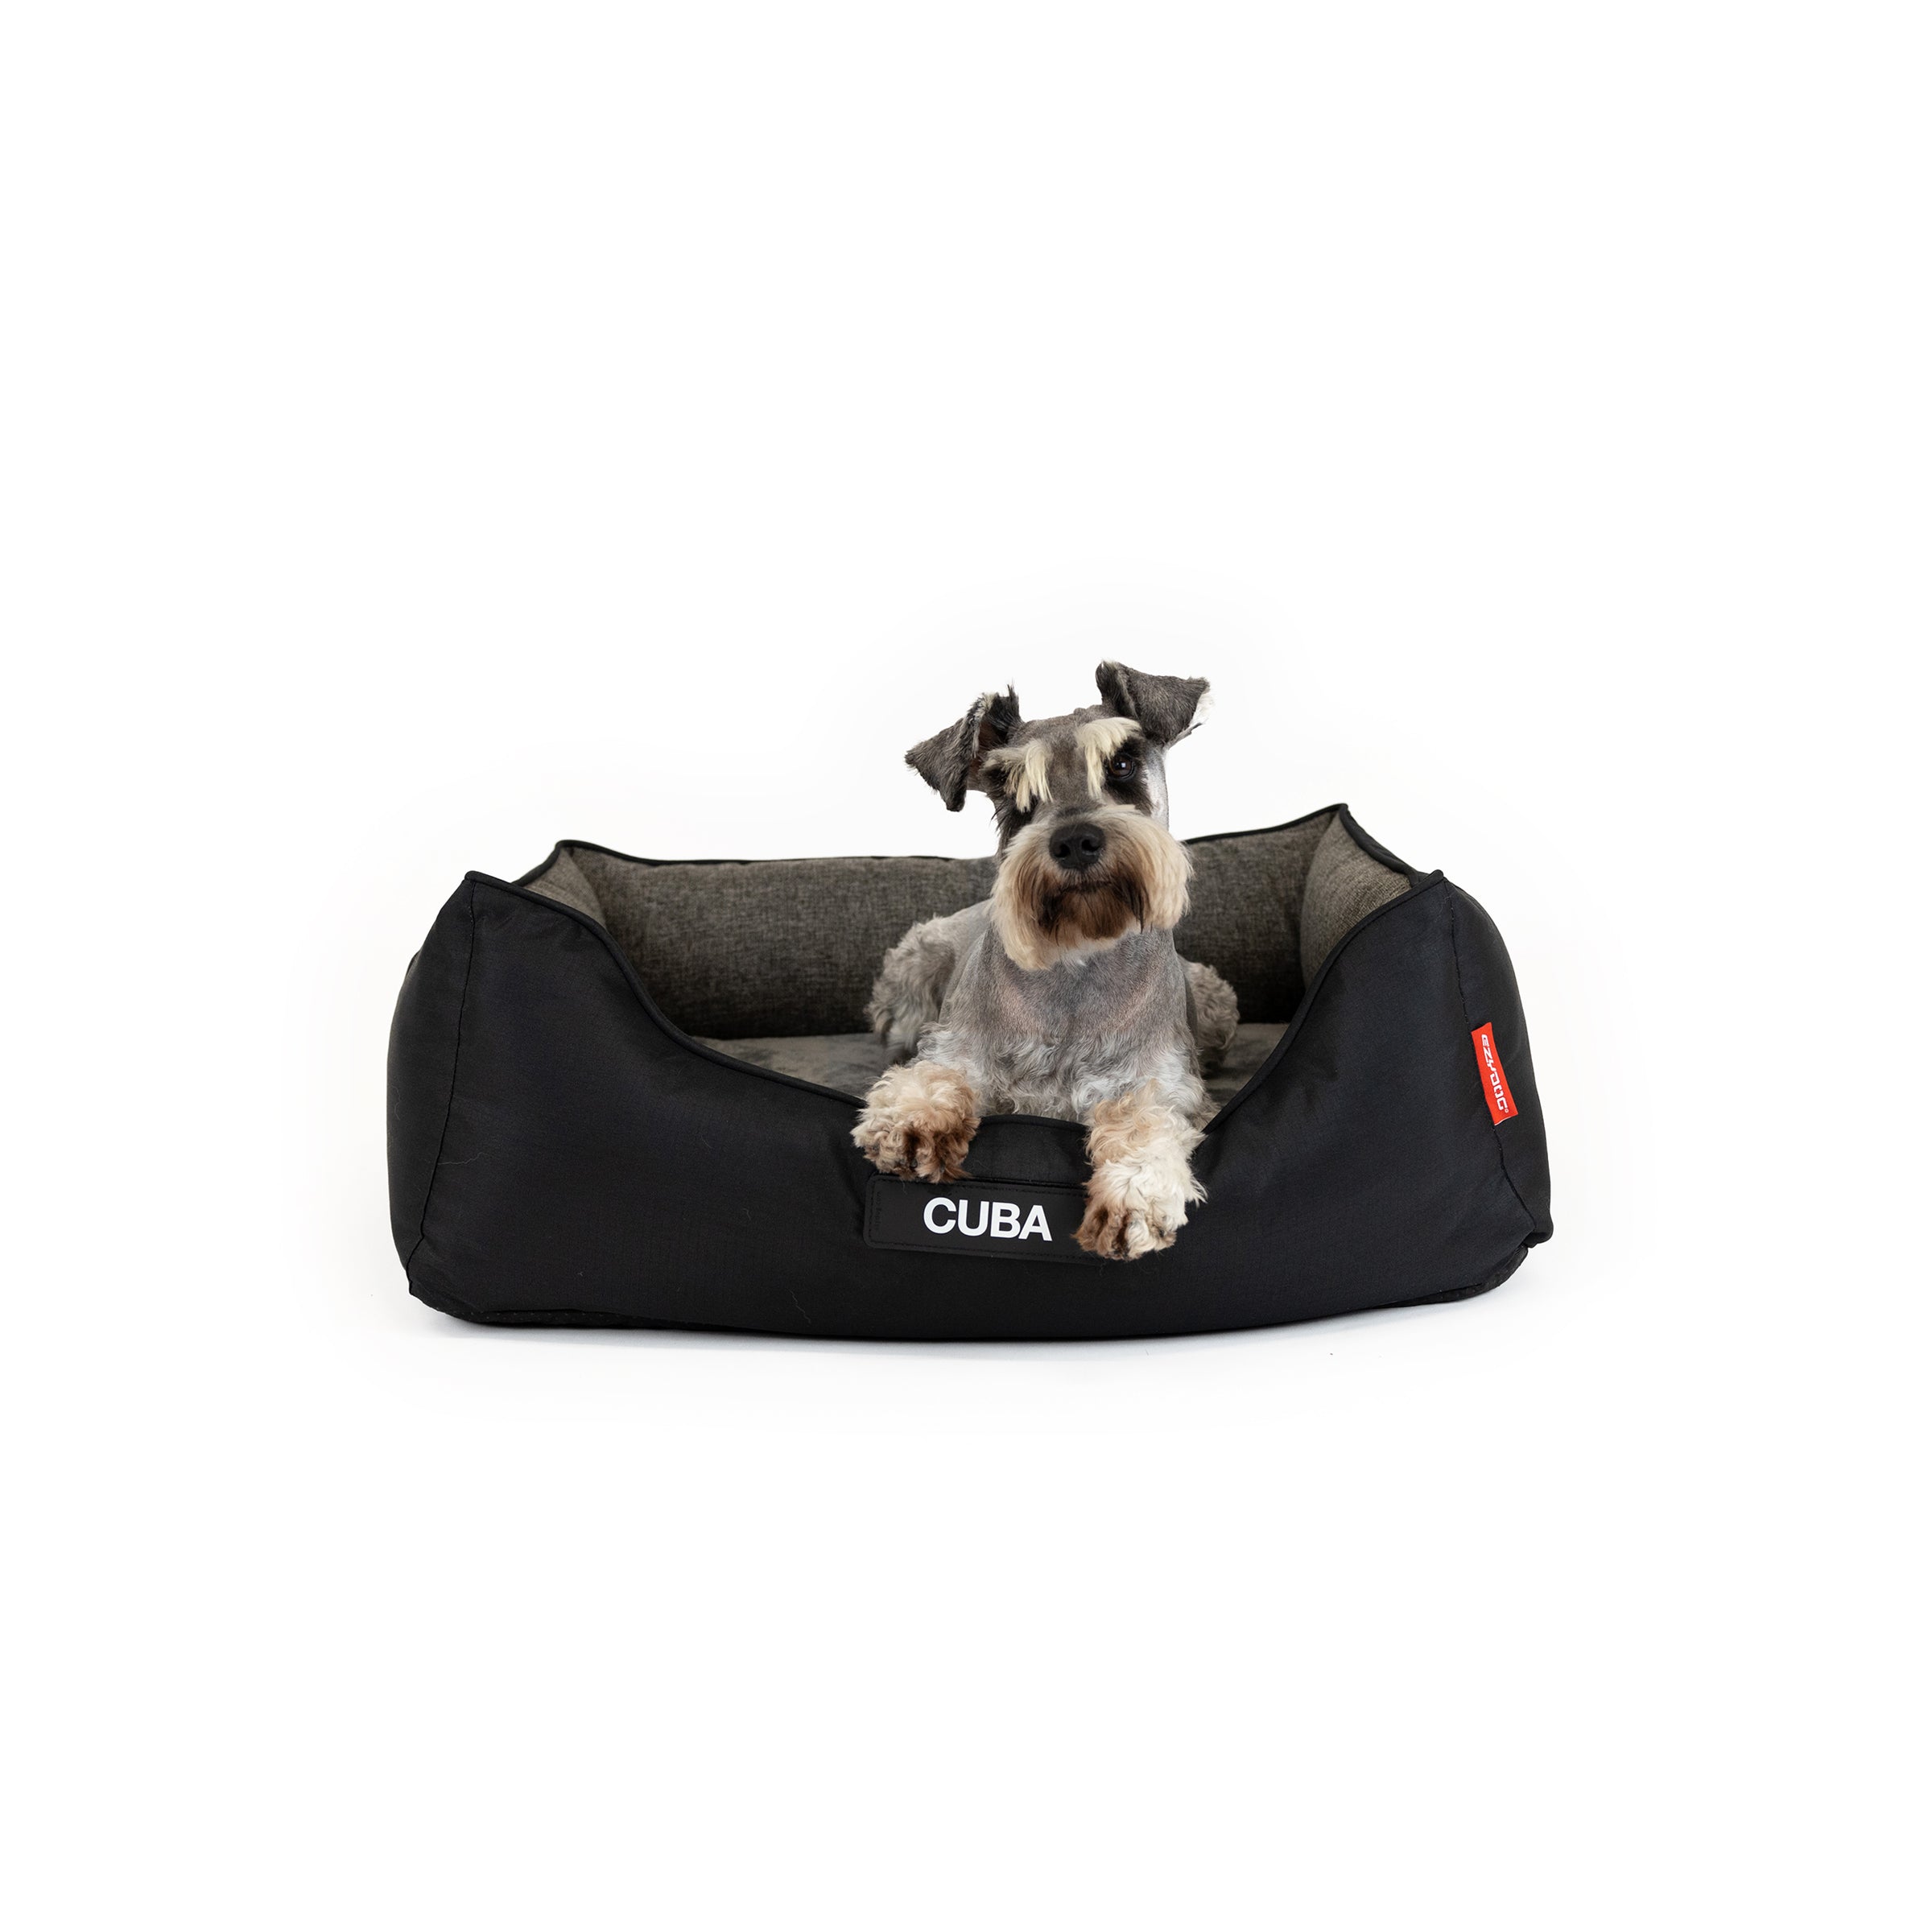 2 in 1 Ortho Smart Dog Bed